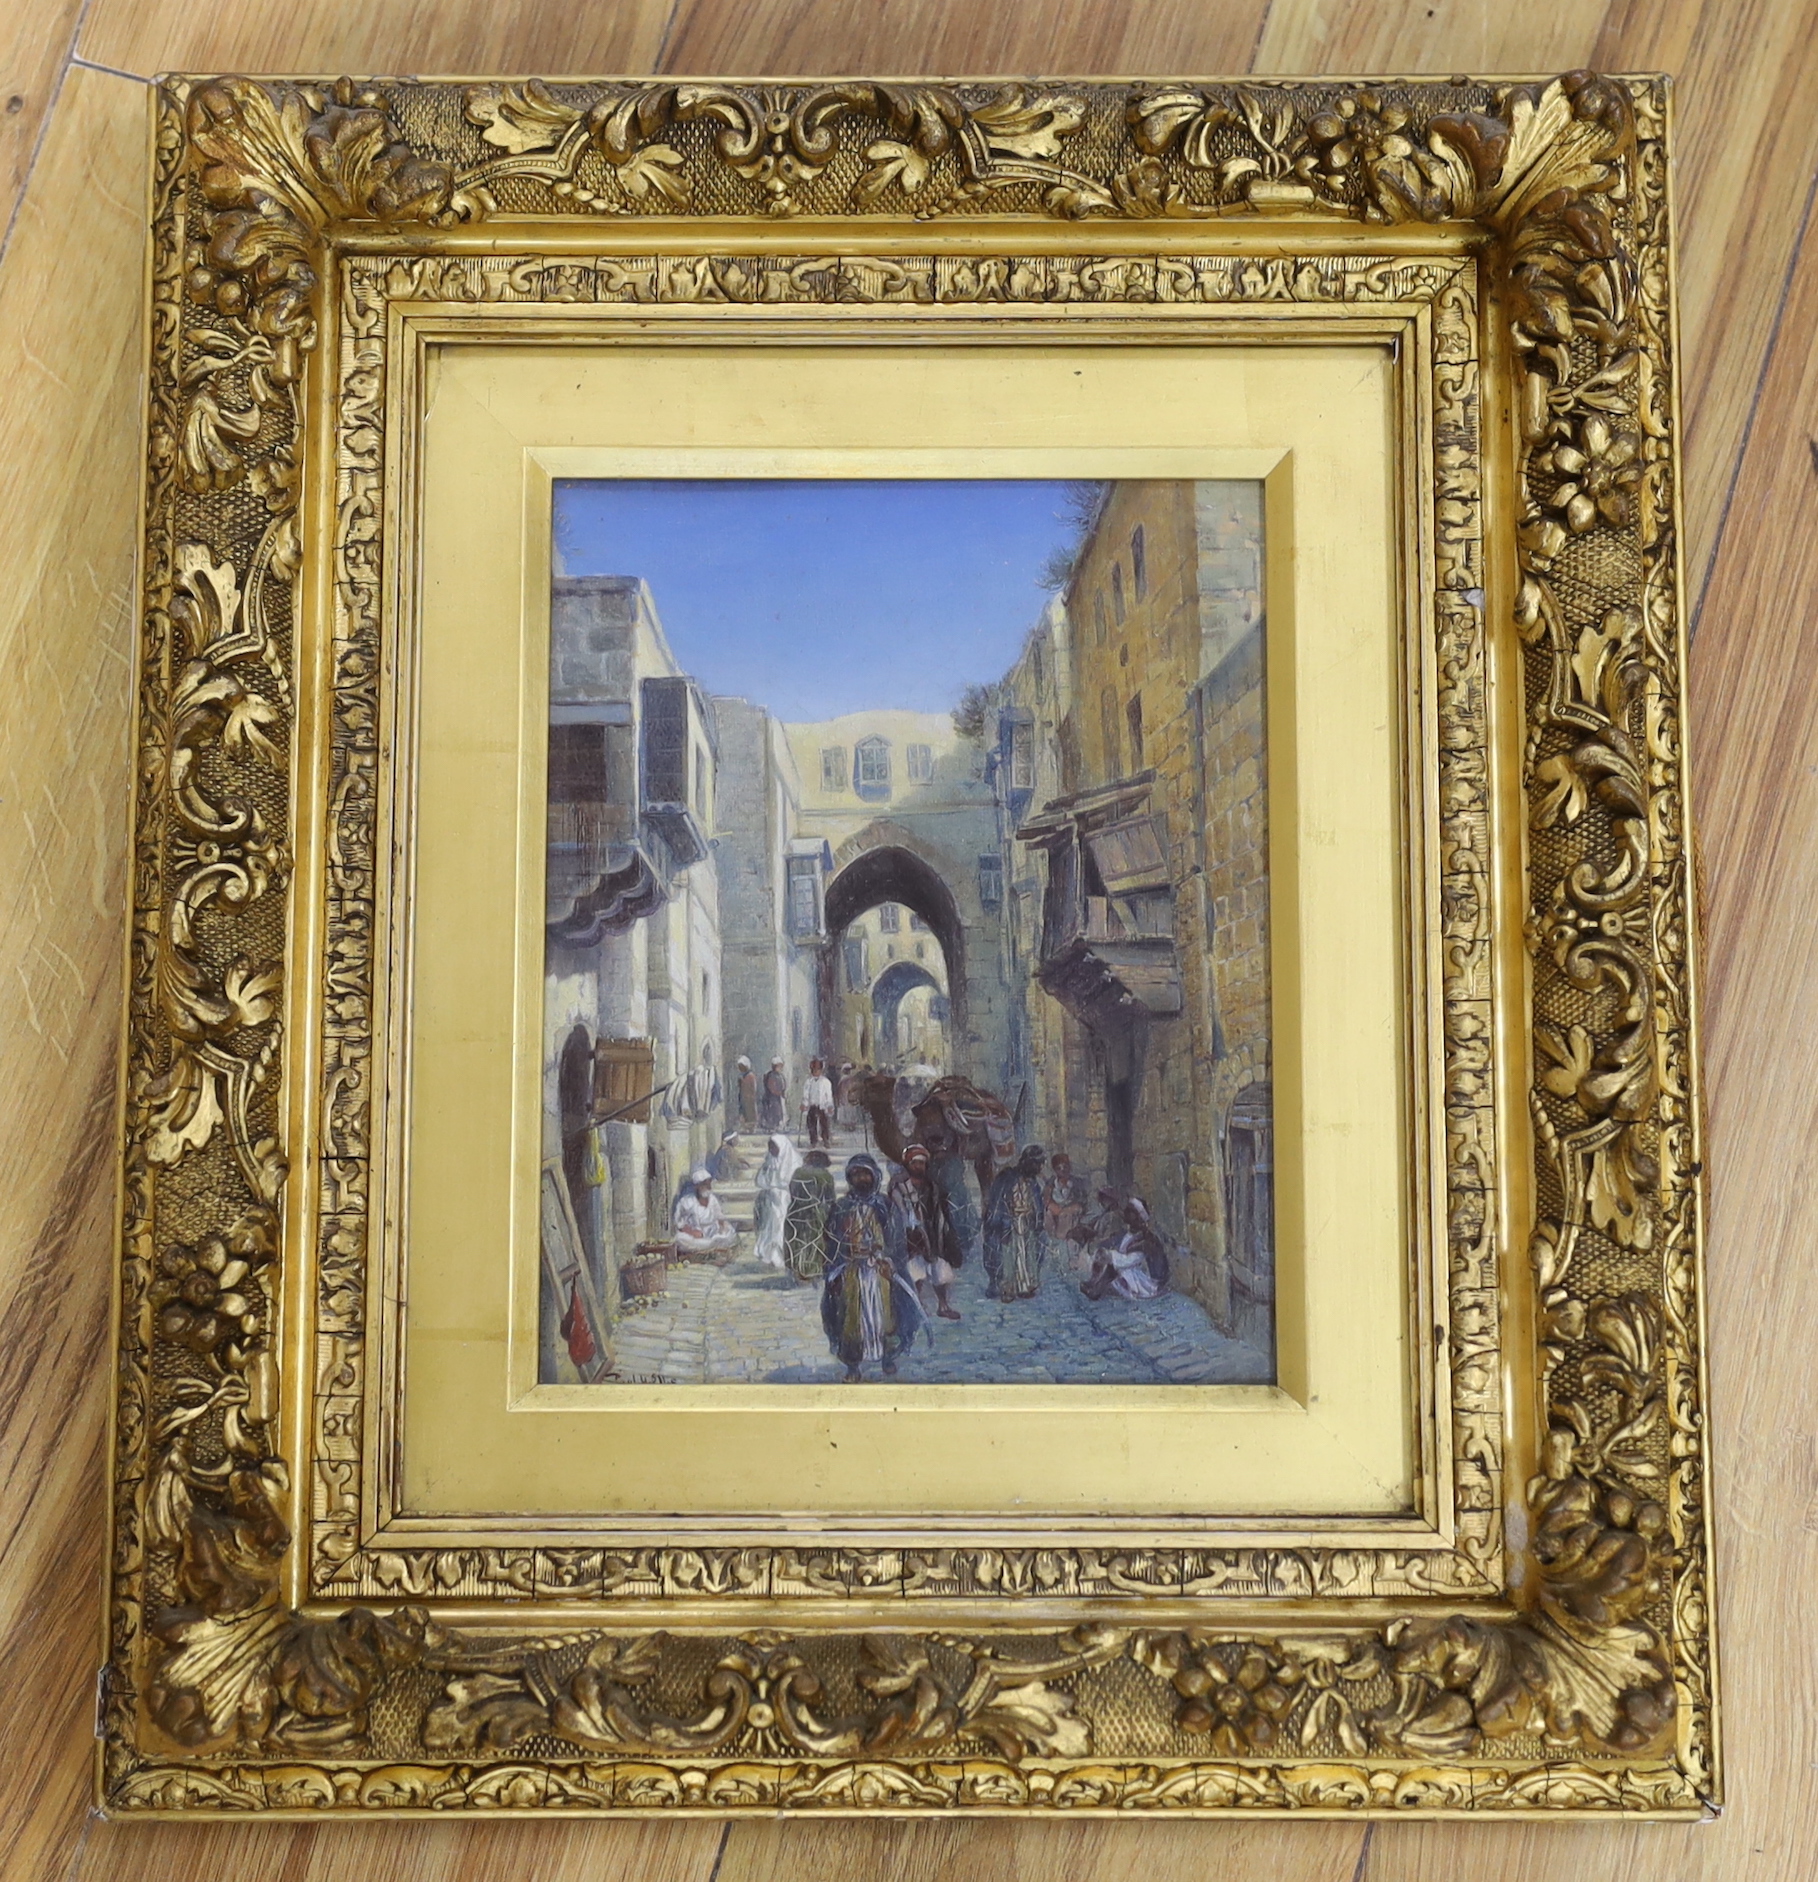 Paul H. Ellis (1882-1908), oil on canvas, Middle Eastern street scene with figures, signed, 24 x 19cm